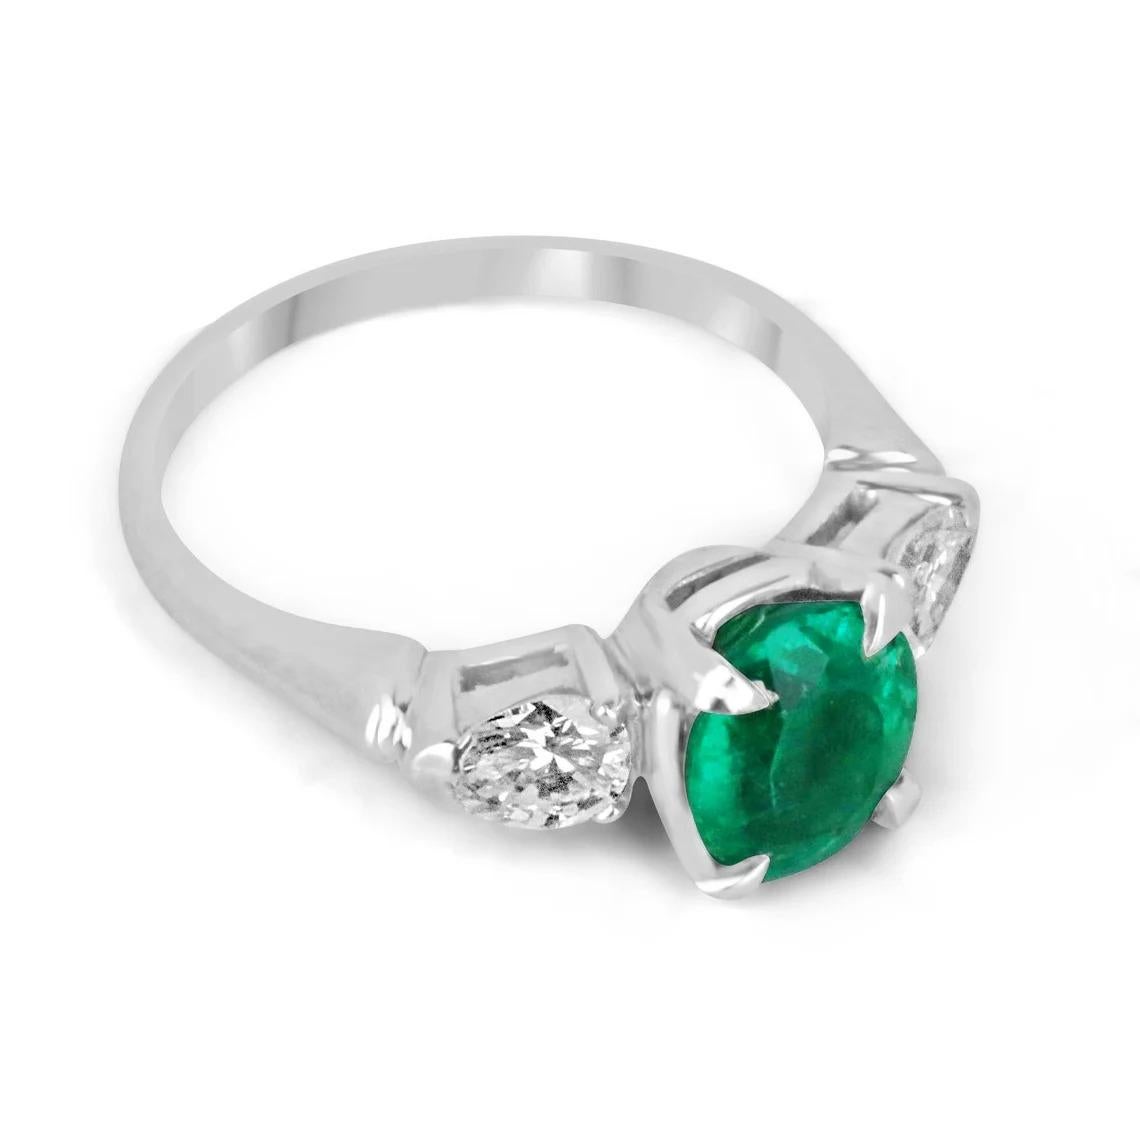 This stunning engagement ring features a 1.48-carat oval-cut emerald as the center stone, known for its exquisite dark green color, unique clarity, and brilliant luster. The emerald is elegantly set in a north-to-south orientation with four claw